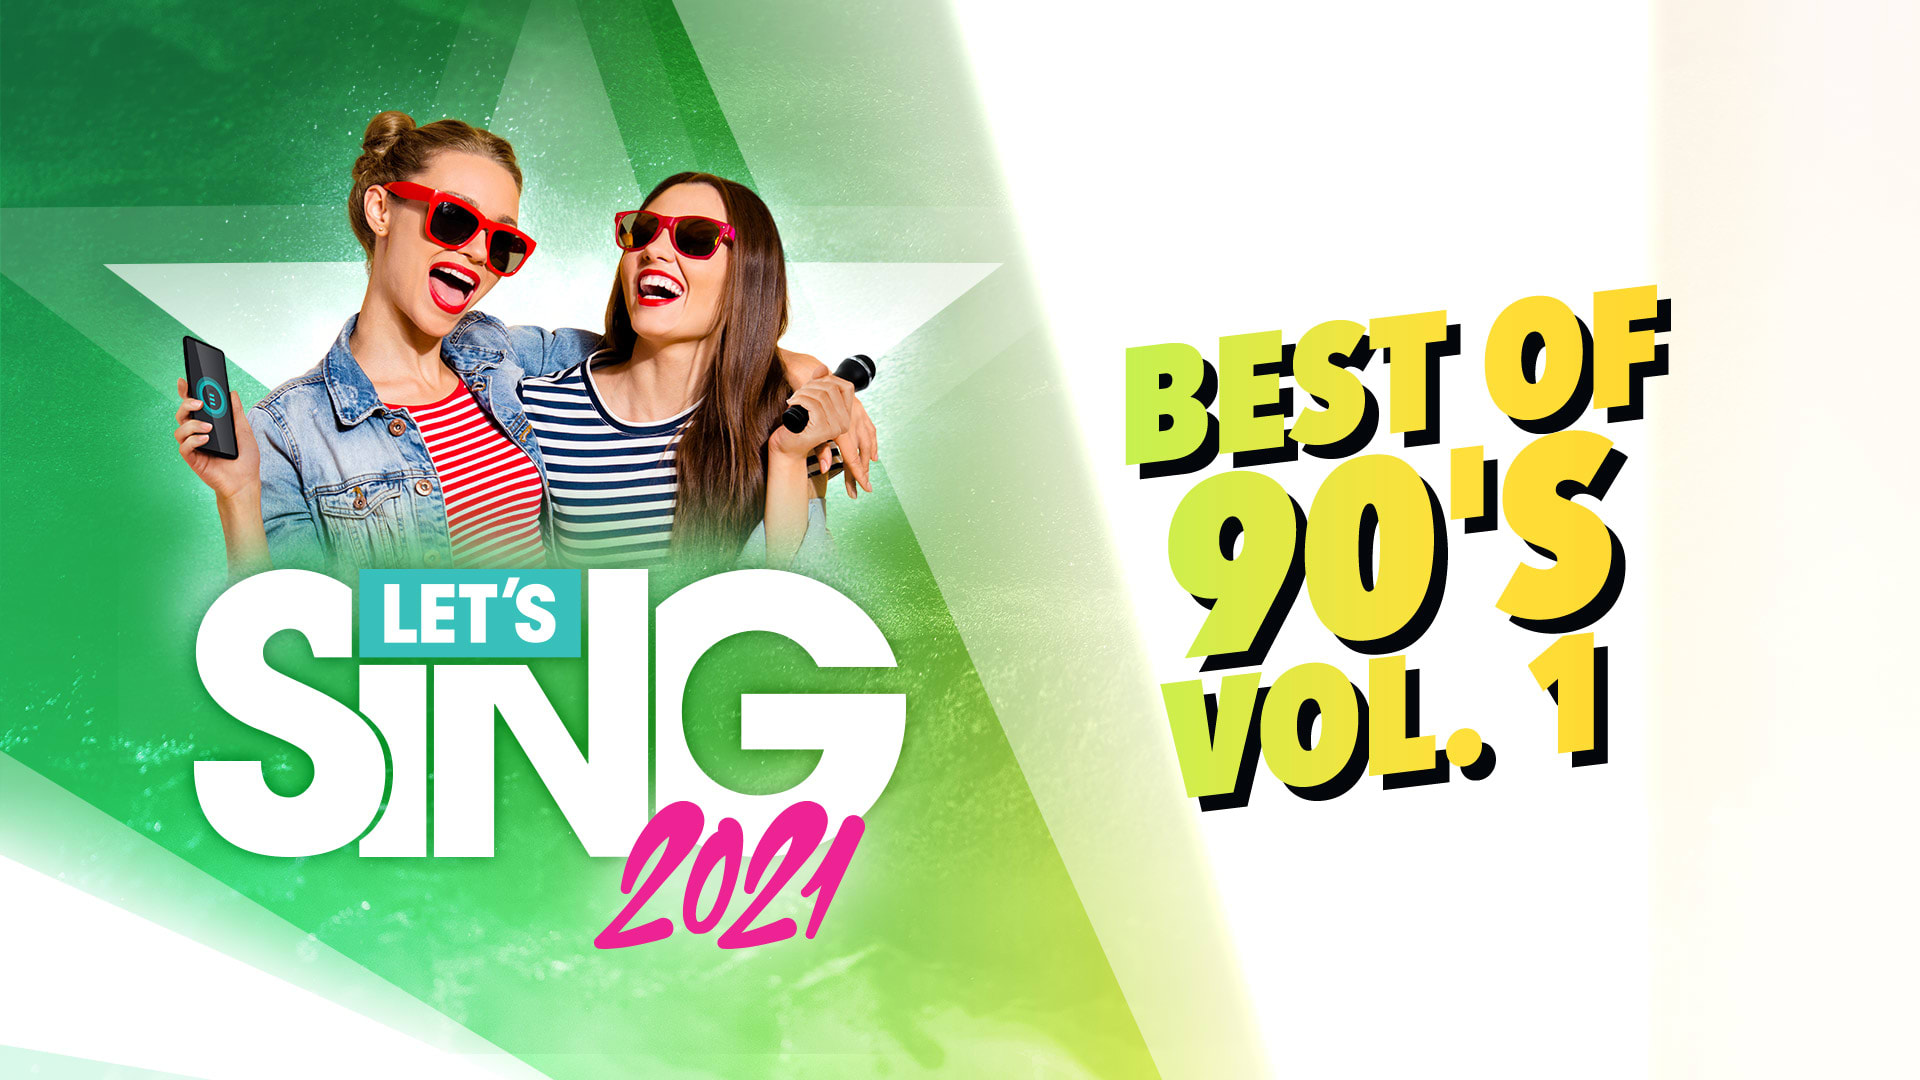 Let's Sing 2021 - Best of 90's Vol. 1 Song Pack